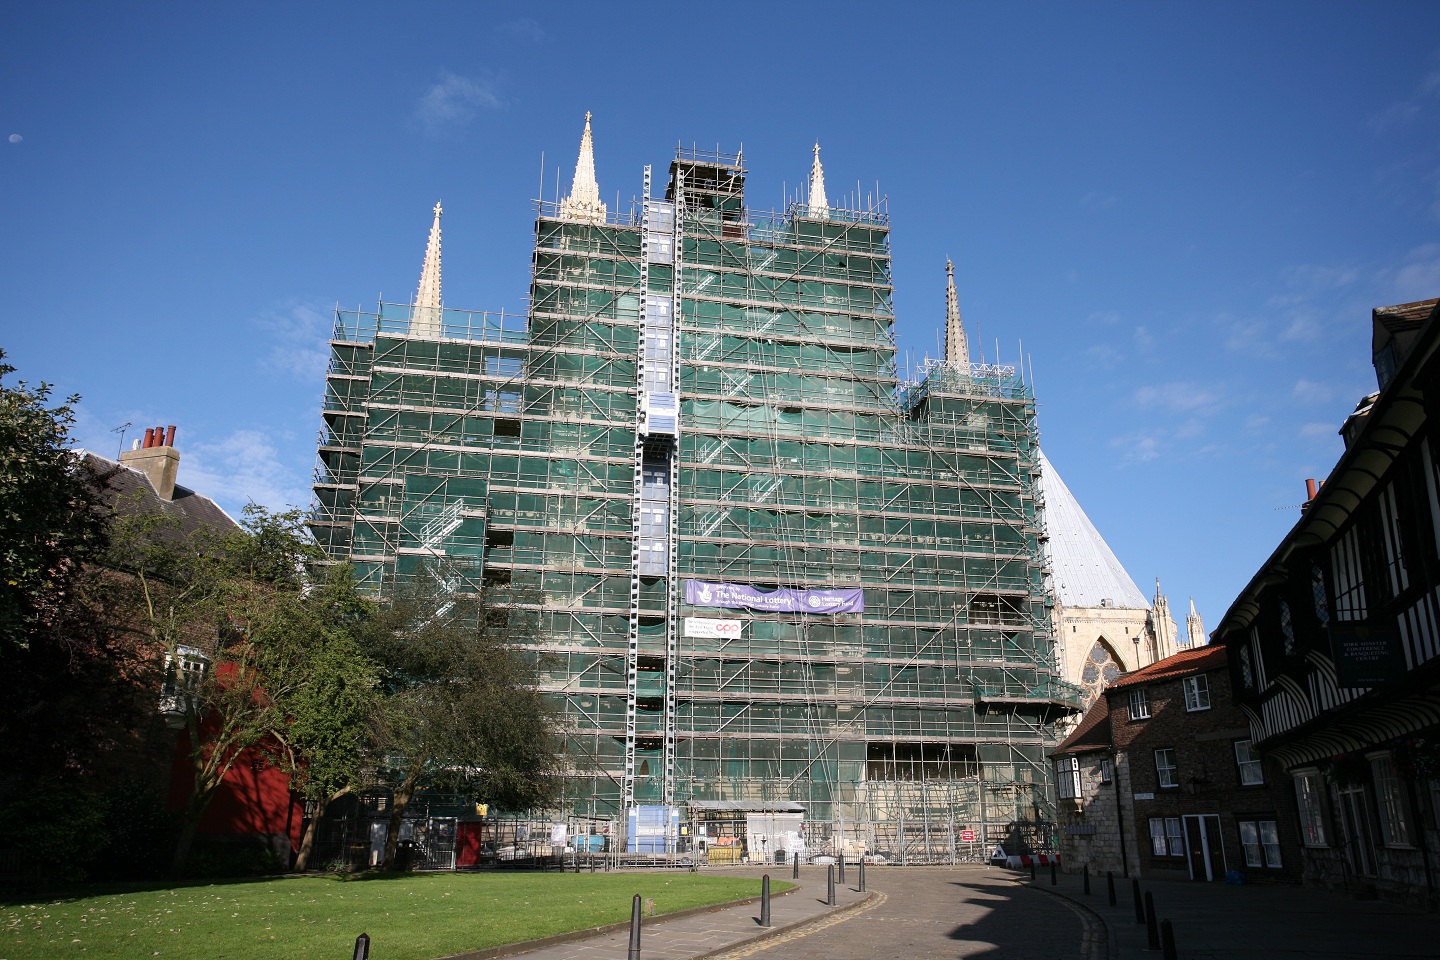 The East End of York Minster covered in scaffolding during the Revealing York Minster project.